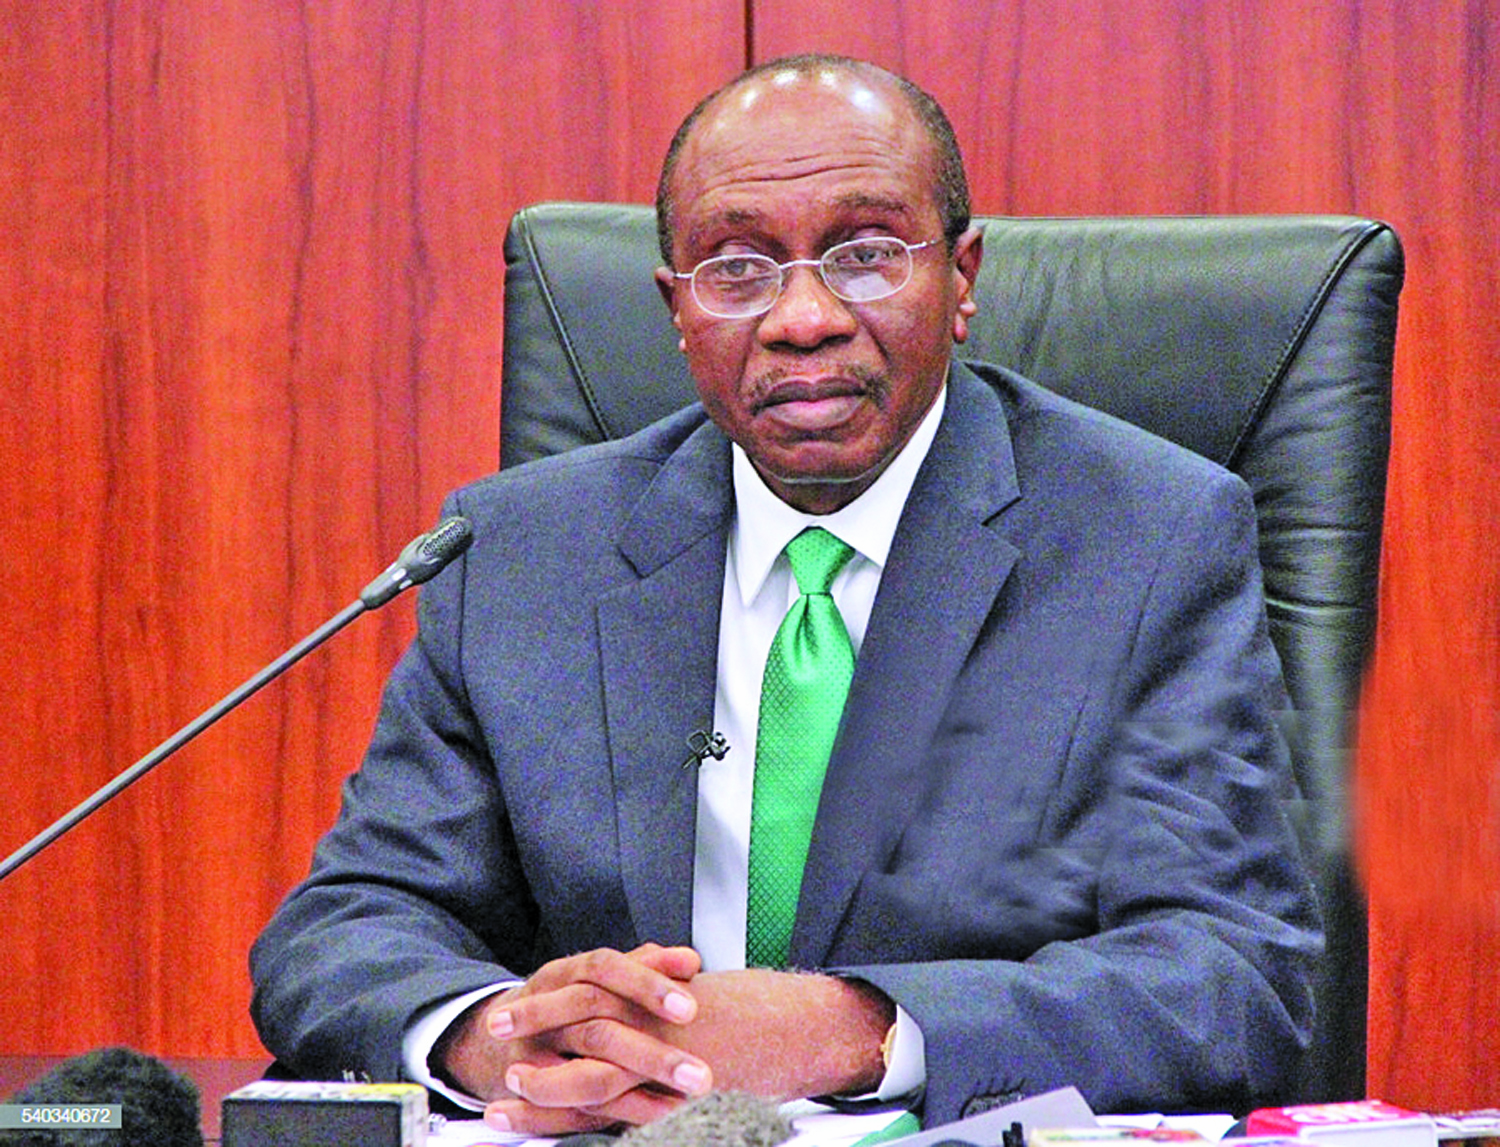 CBN’s aggressive CRR policy stunts banks’ ROE growth, says Agusto & Co